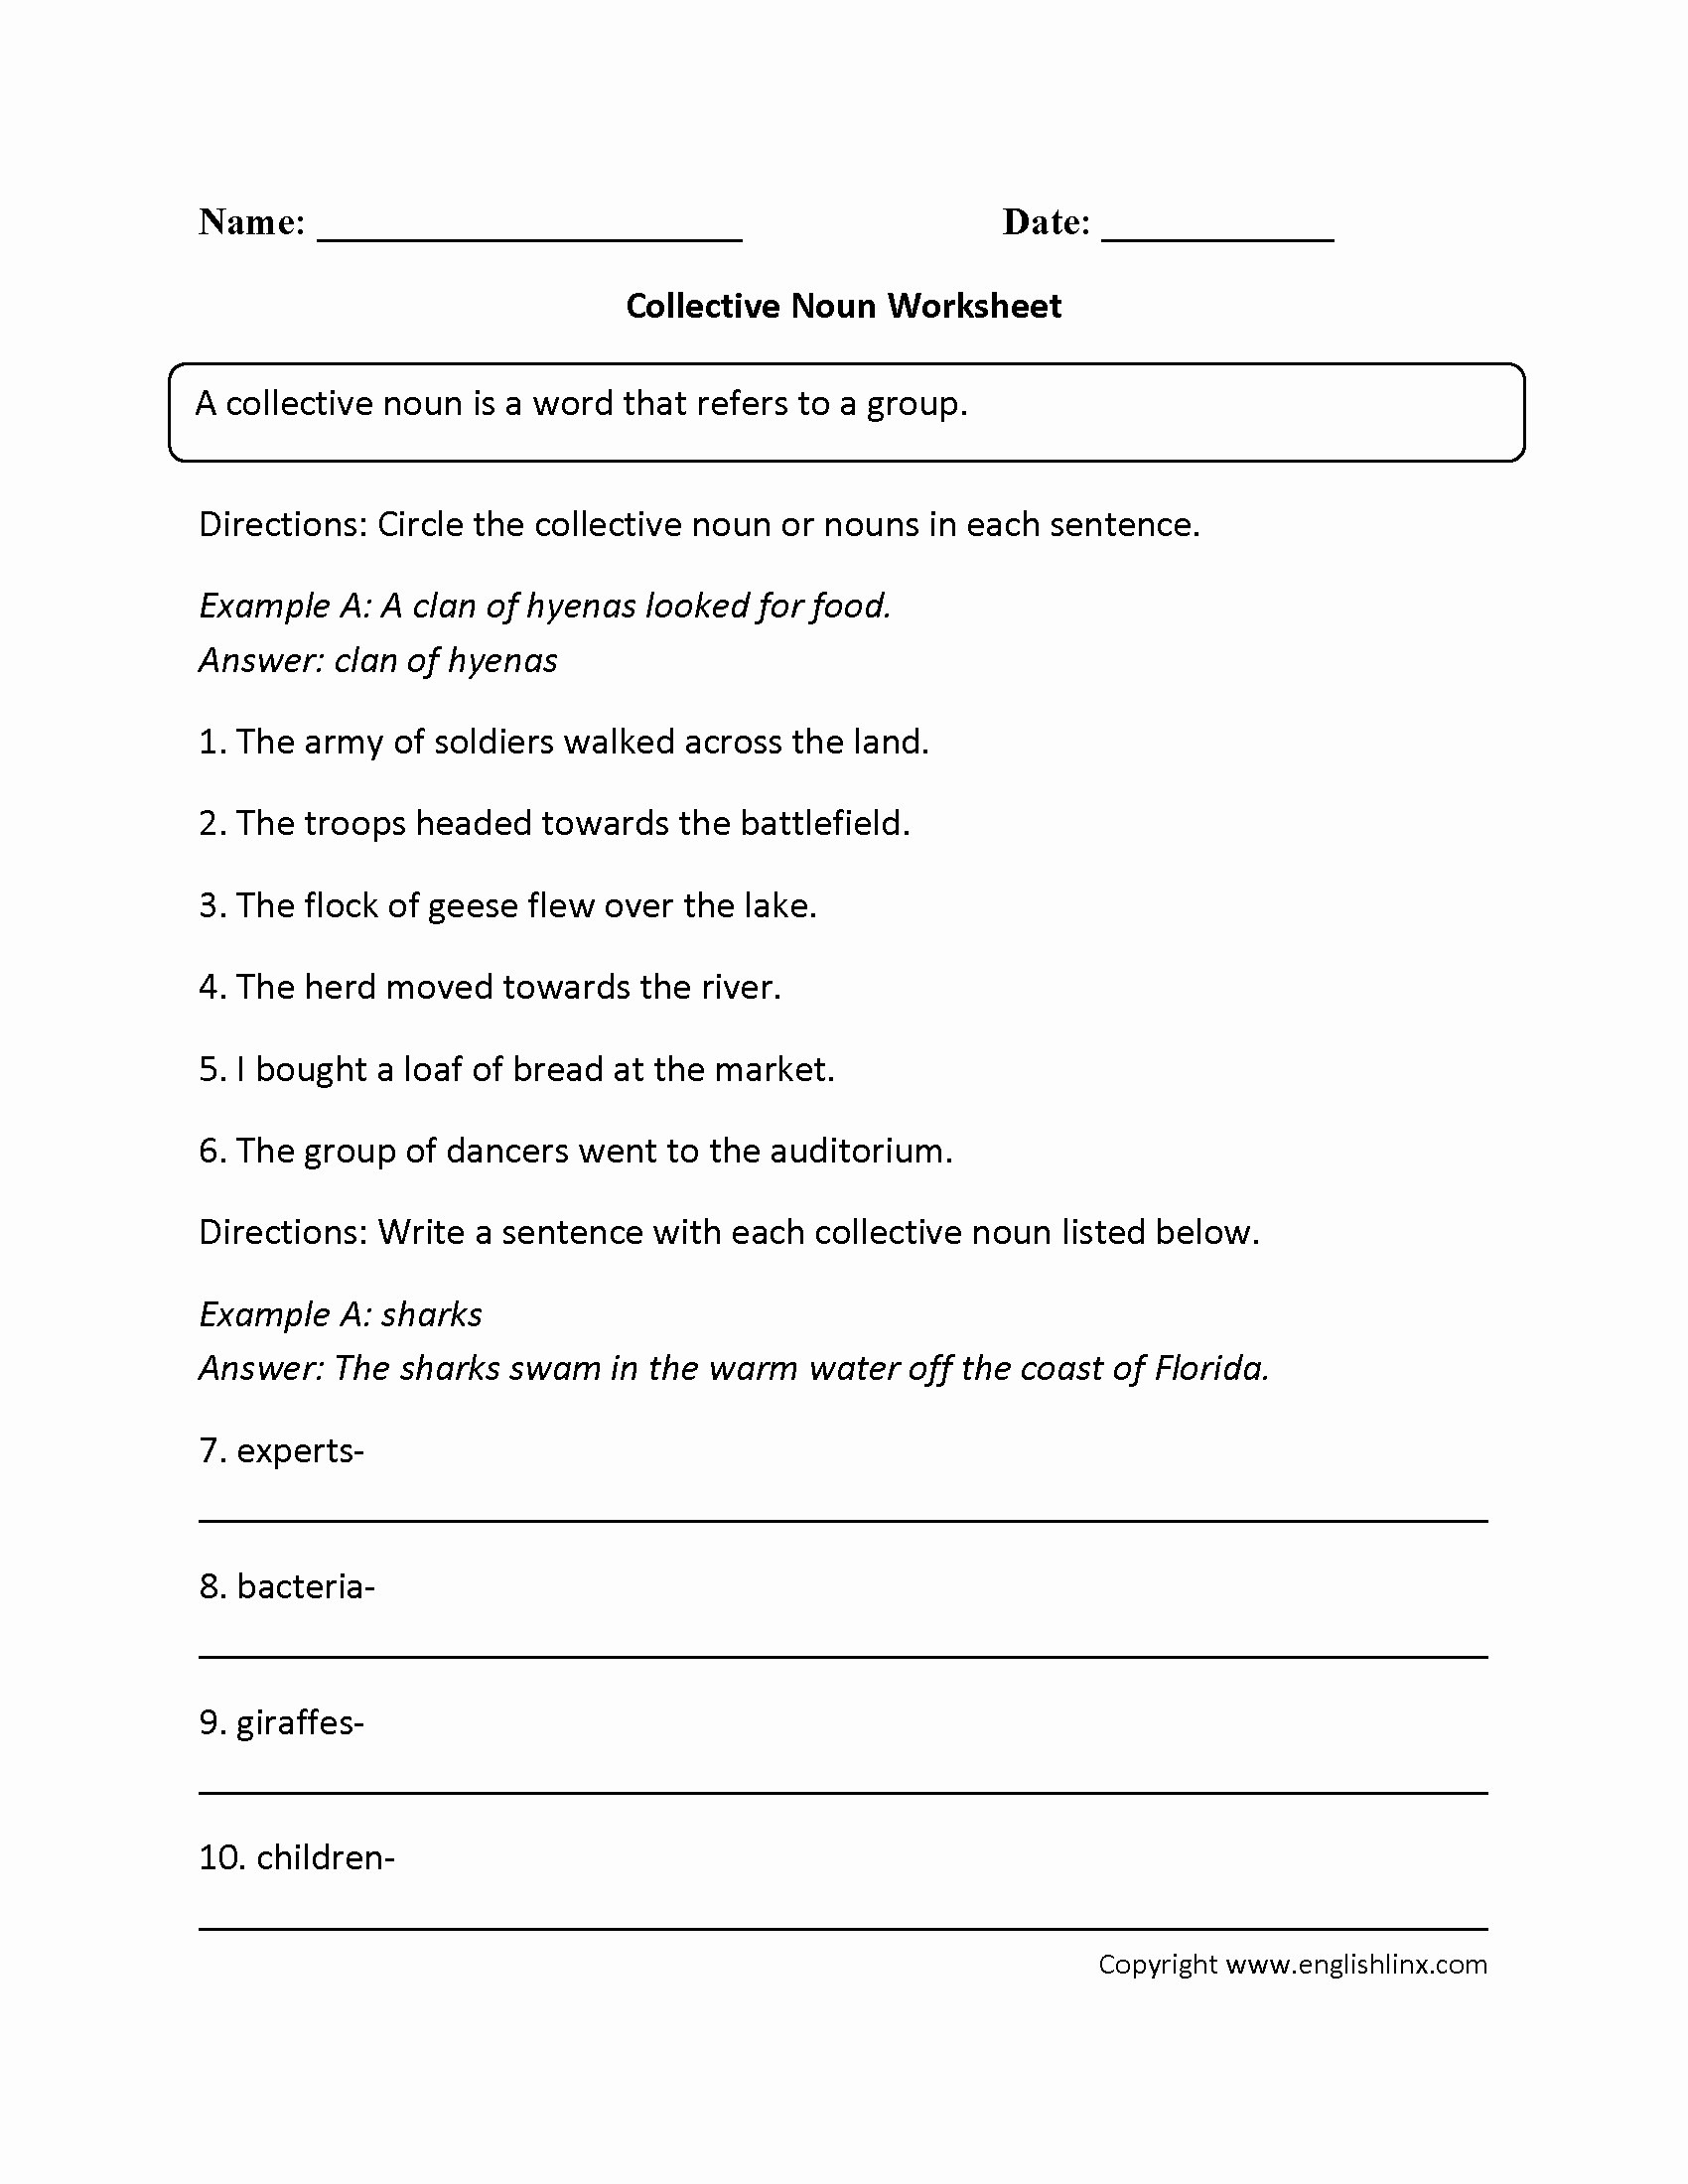 Worksheet : Division Practice Worksheets 3Rd Grade Writing For | Free Printable English Worksheets For 3Rd Grade